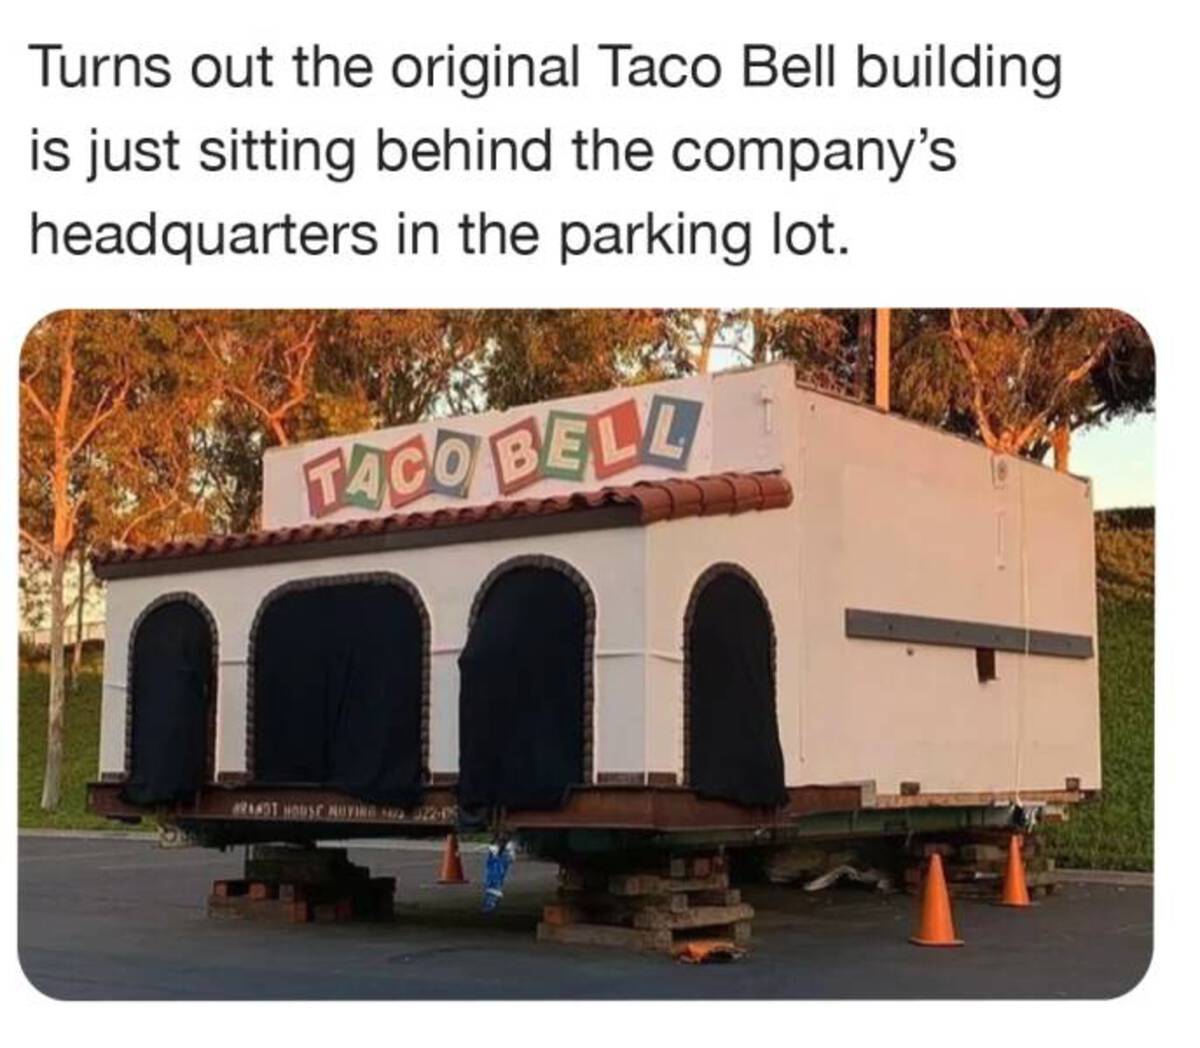 first taco bell - Turns out the original Taco Bell building is just sitting behind the company's headquarters in the parking lot. Taco Bell m Breast House Buying 2205